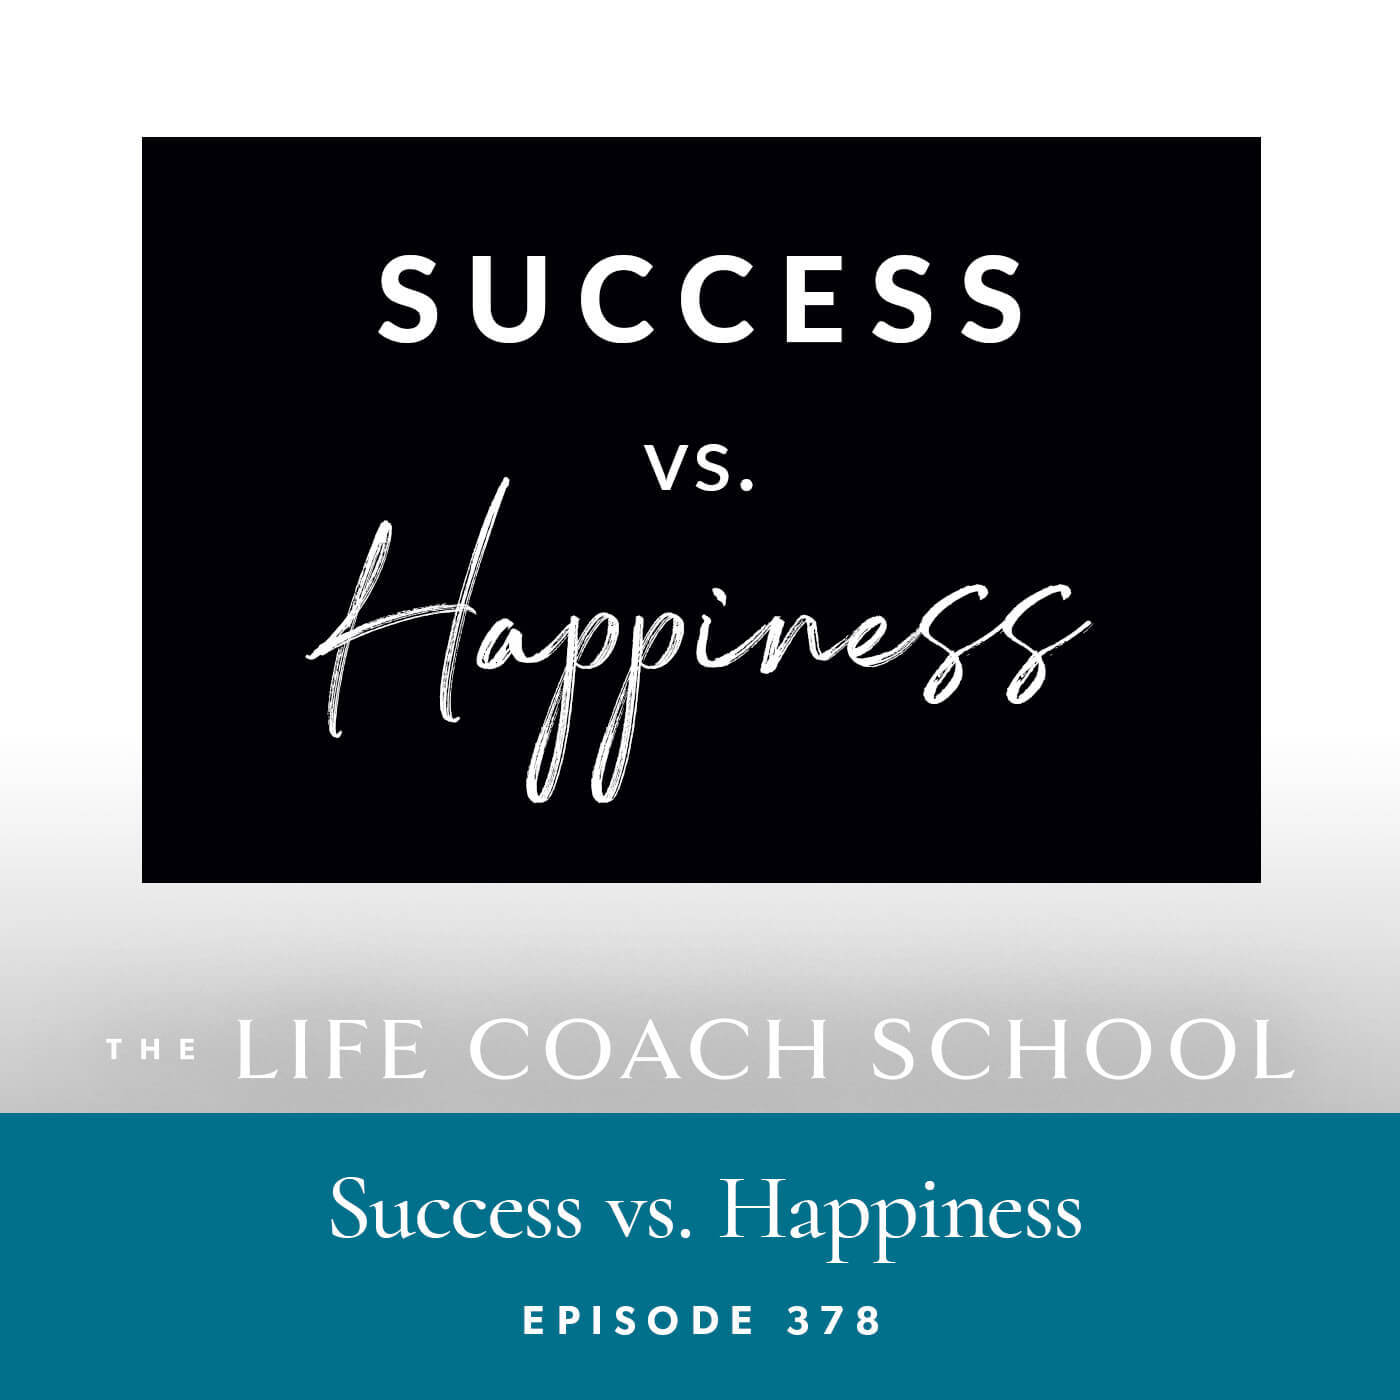 The Life Coach School Podcast with Brooke Castillo | Success vs. Happiness